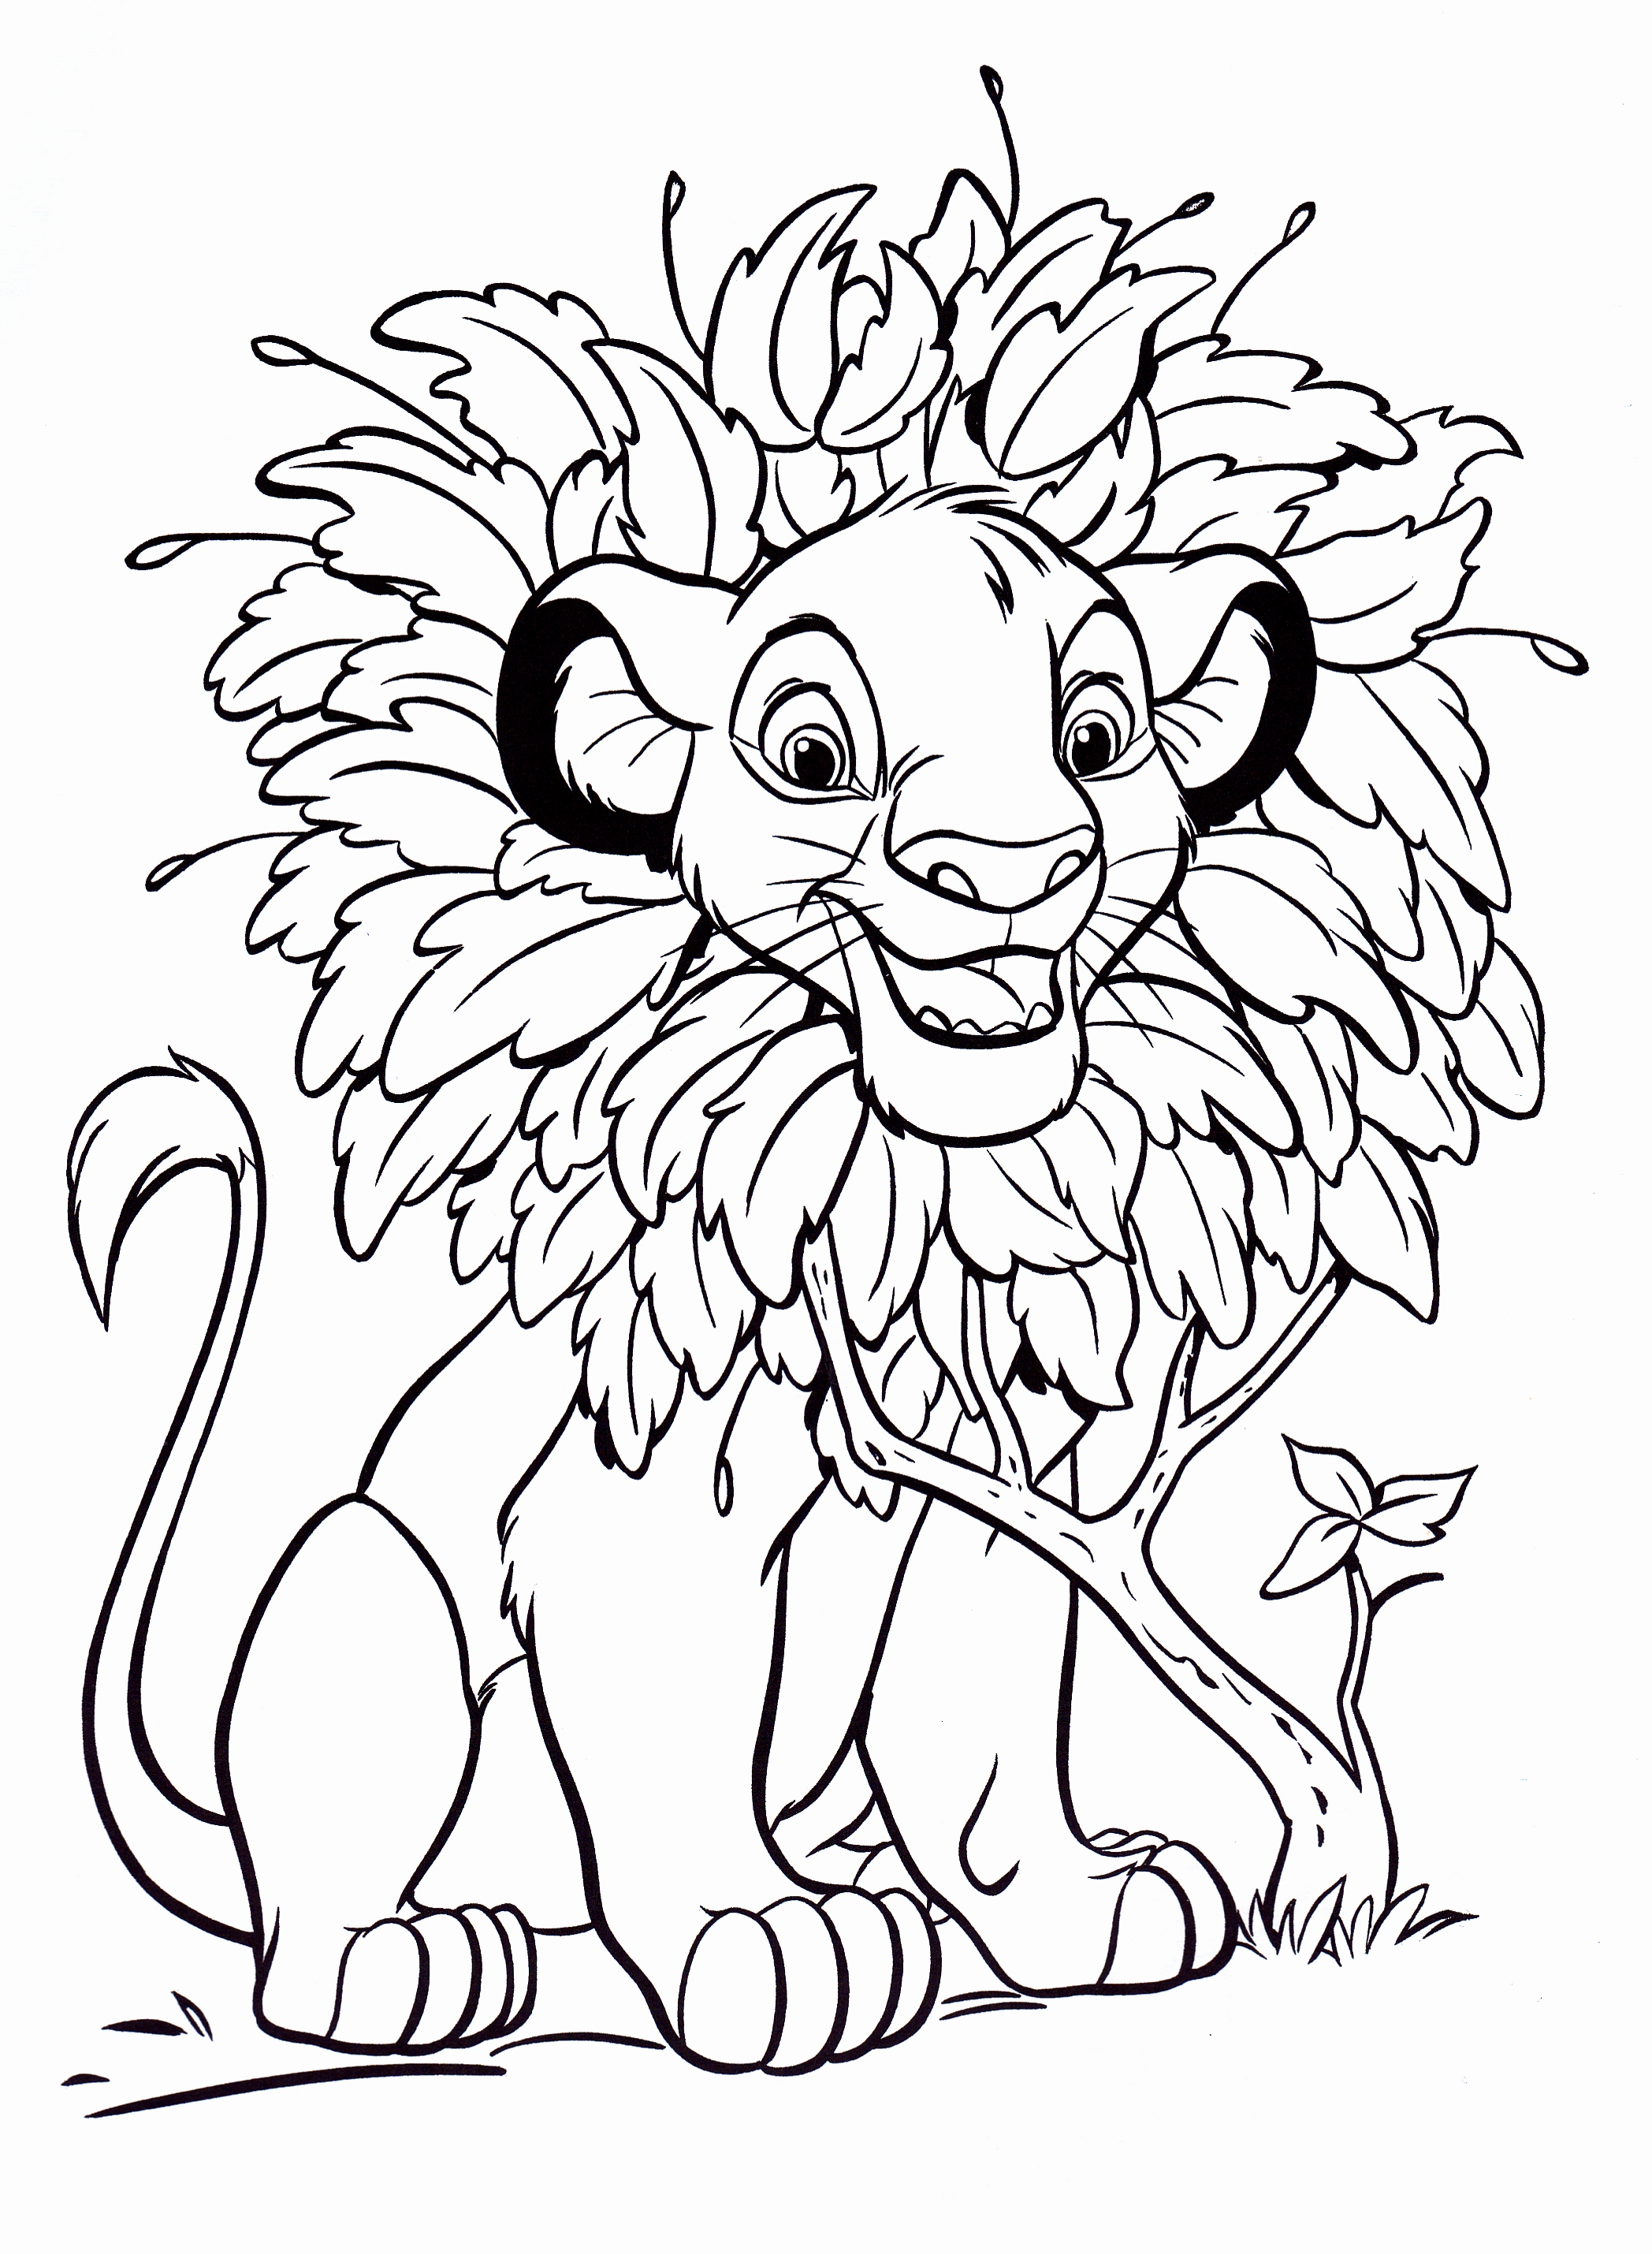 10-free-printable-holiday-adult-coloring-pages